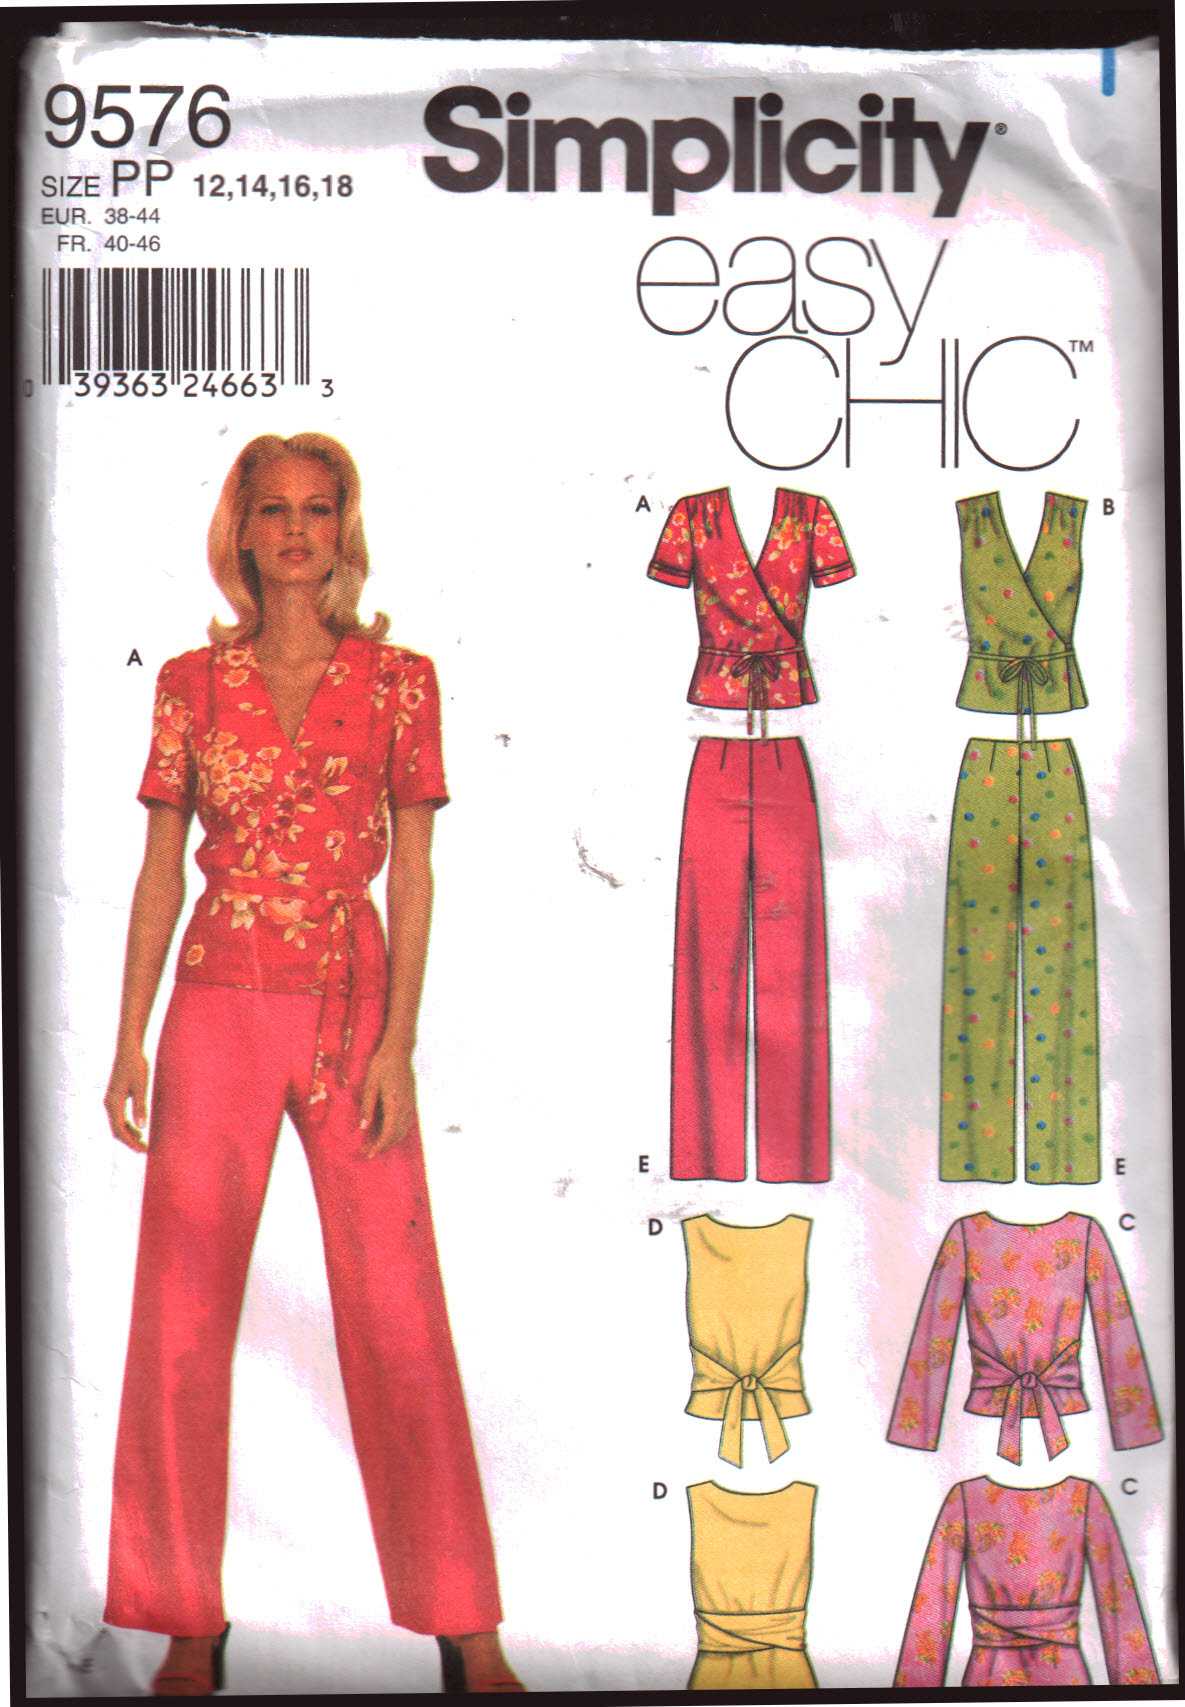 Simplicity 9576 Misses' Tops and Pants Size: PP 12,14,16,18 Used Sewing ...